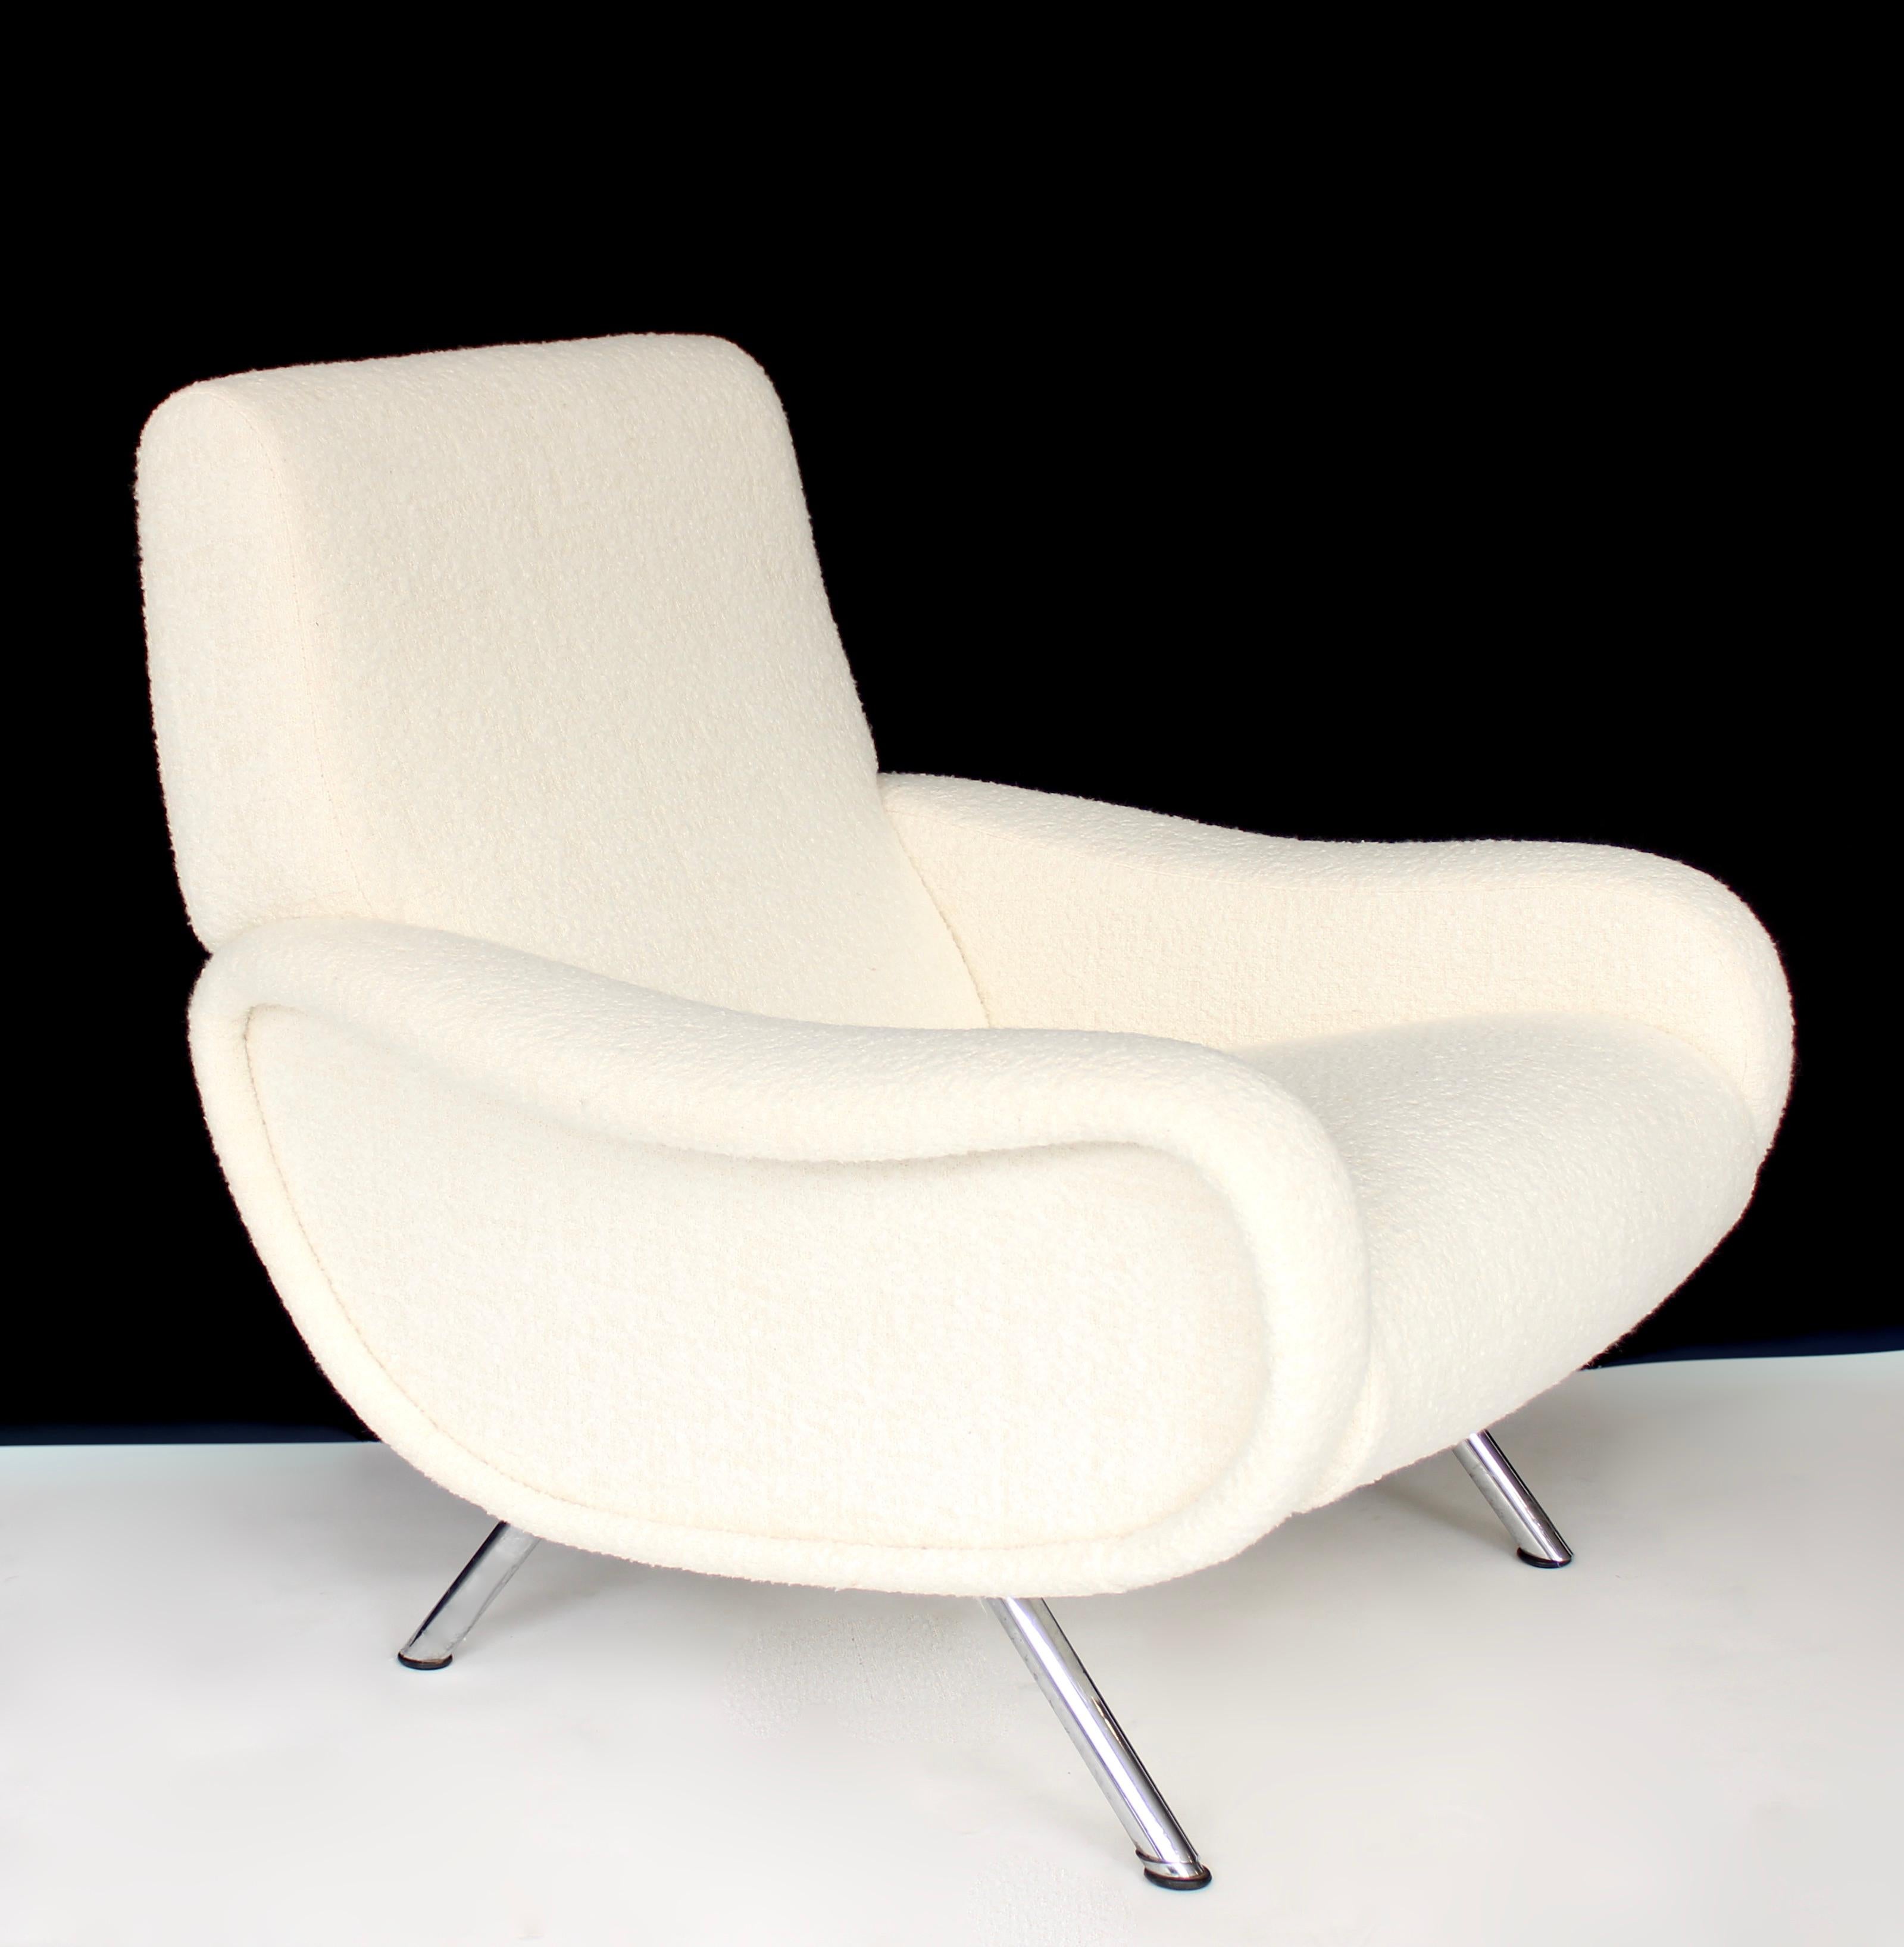 The Marco Zanuso lady chair was designed by Marco Zanuso for Arflex in 1951.
It won the award Medaglia d’oro or Gold Medal at the Milan IX Triennale in 1951. This lounge chair is so very comfortable and Classic elegance in a modern